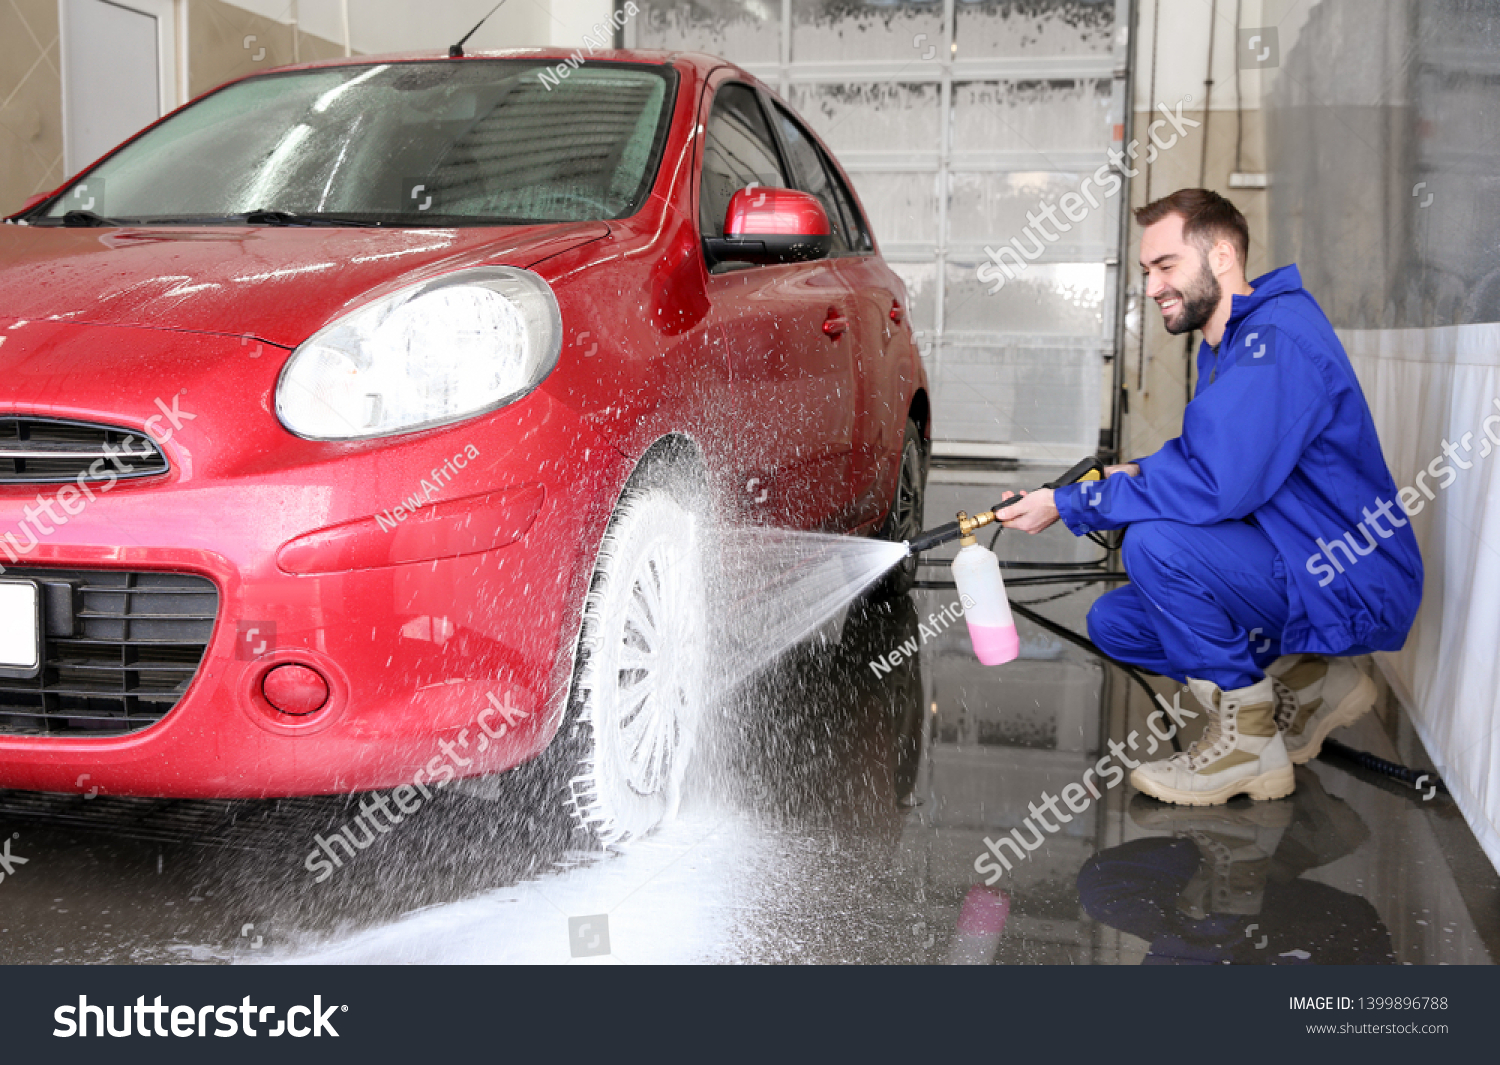 Worker cleaning automobile with high pressure water jet at car wash #1399896788